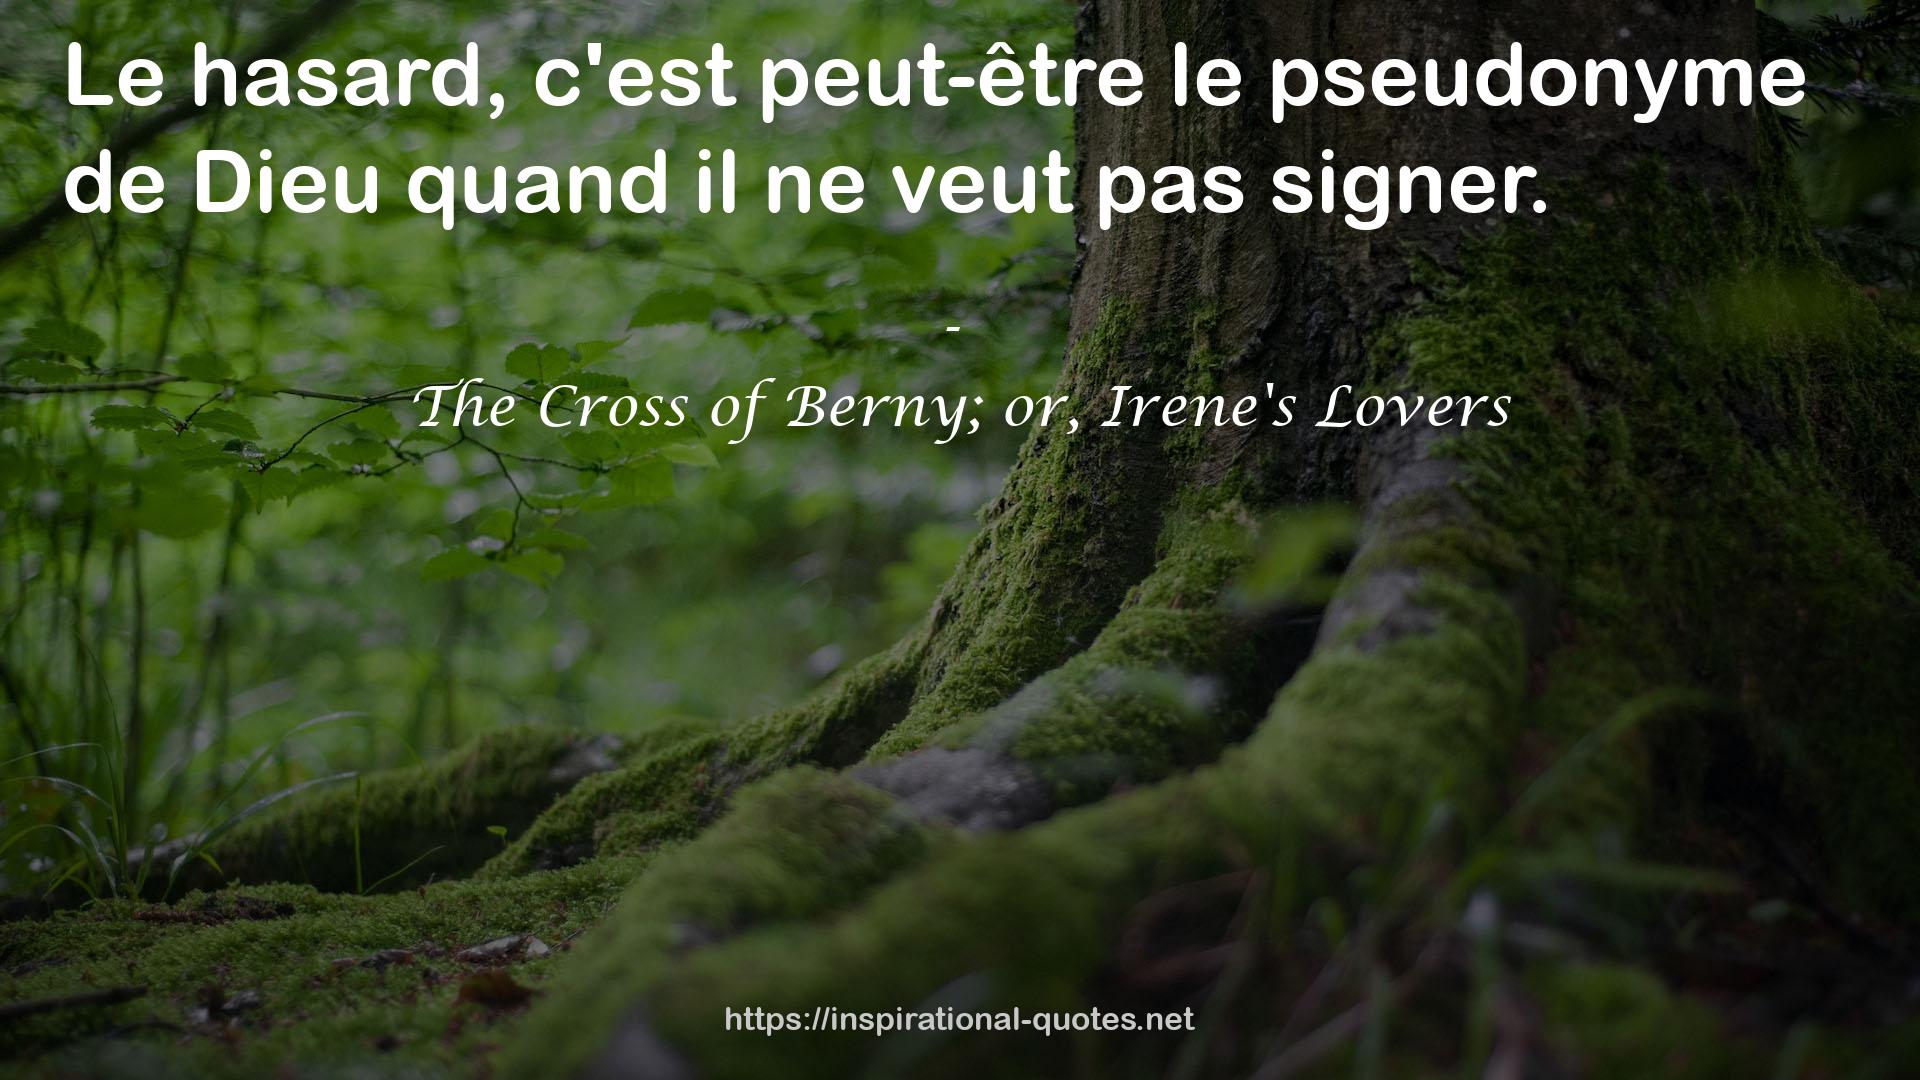 The Cross of Berny; or, Irene's Lovers QUOTES